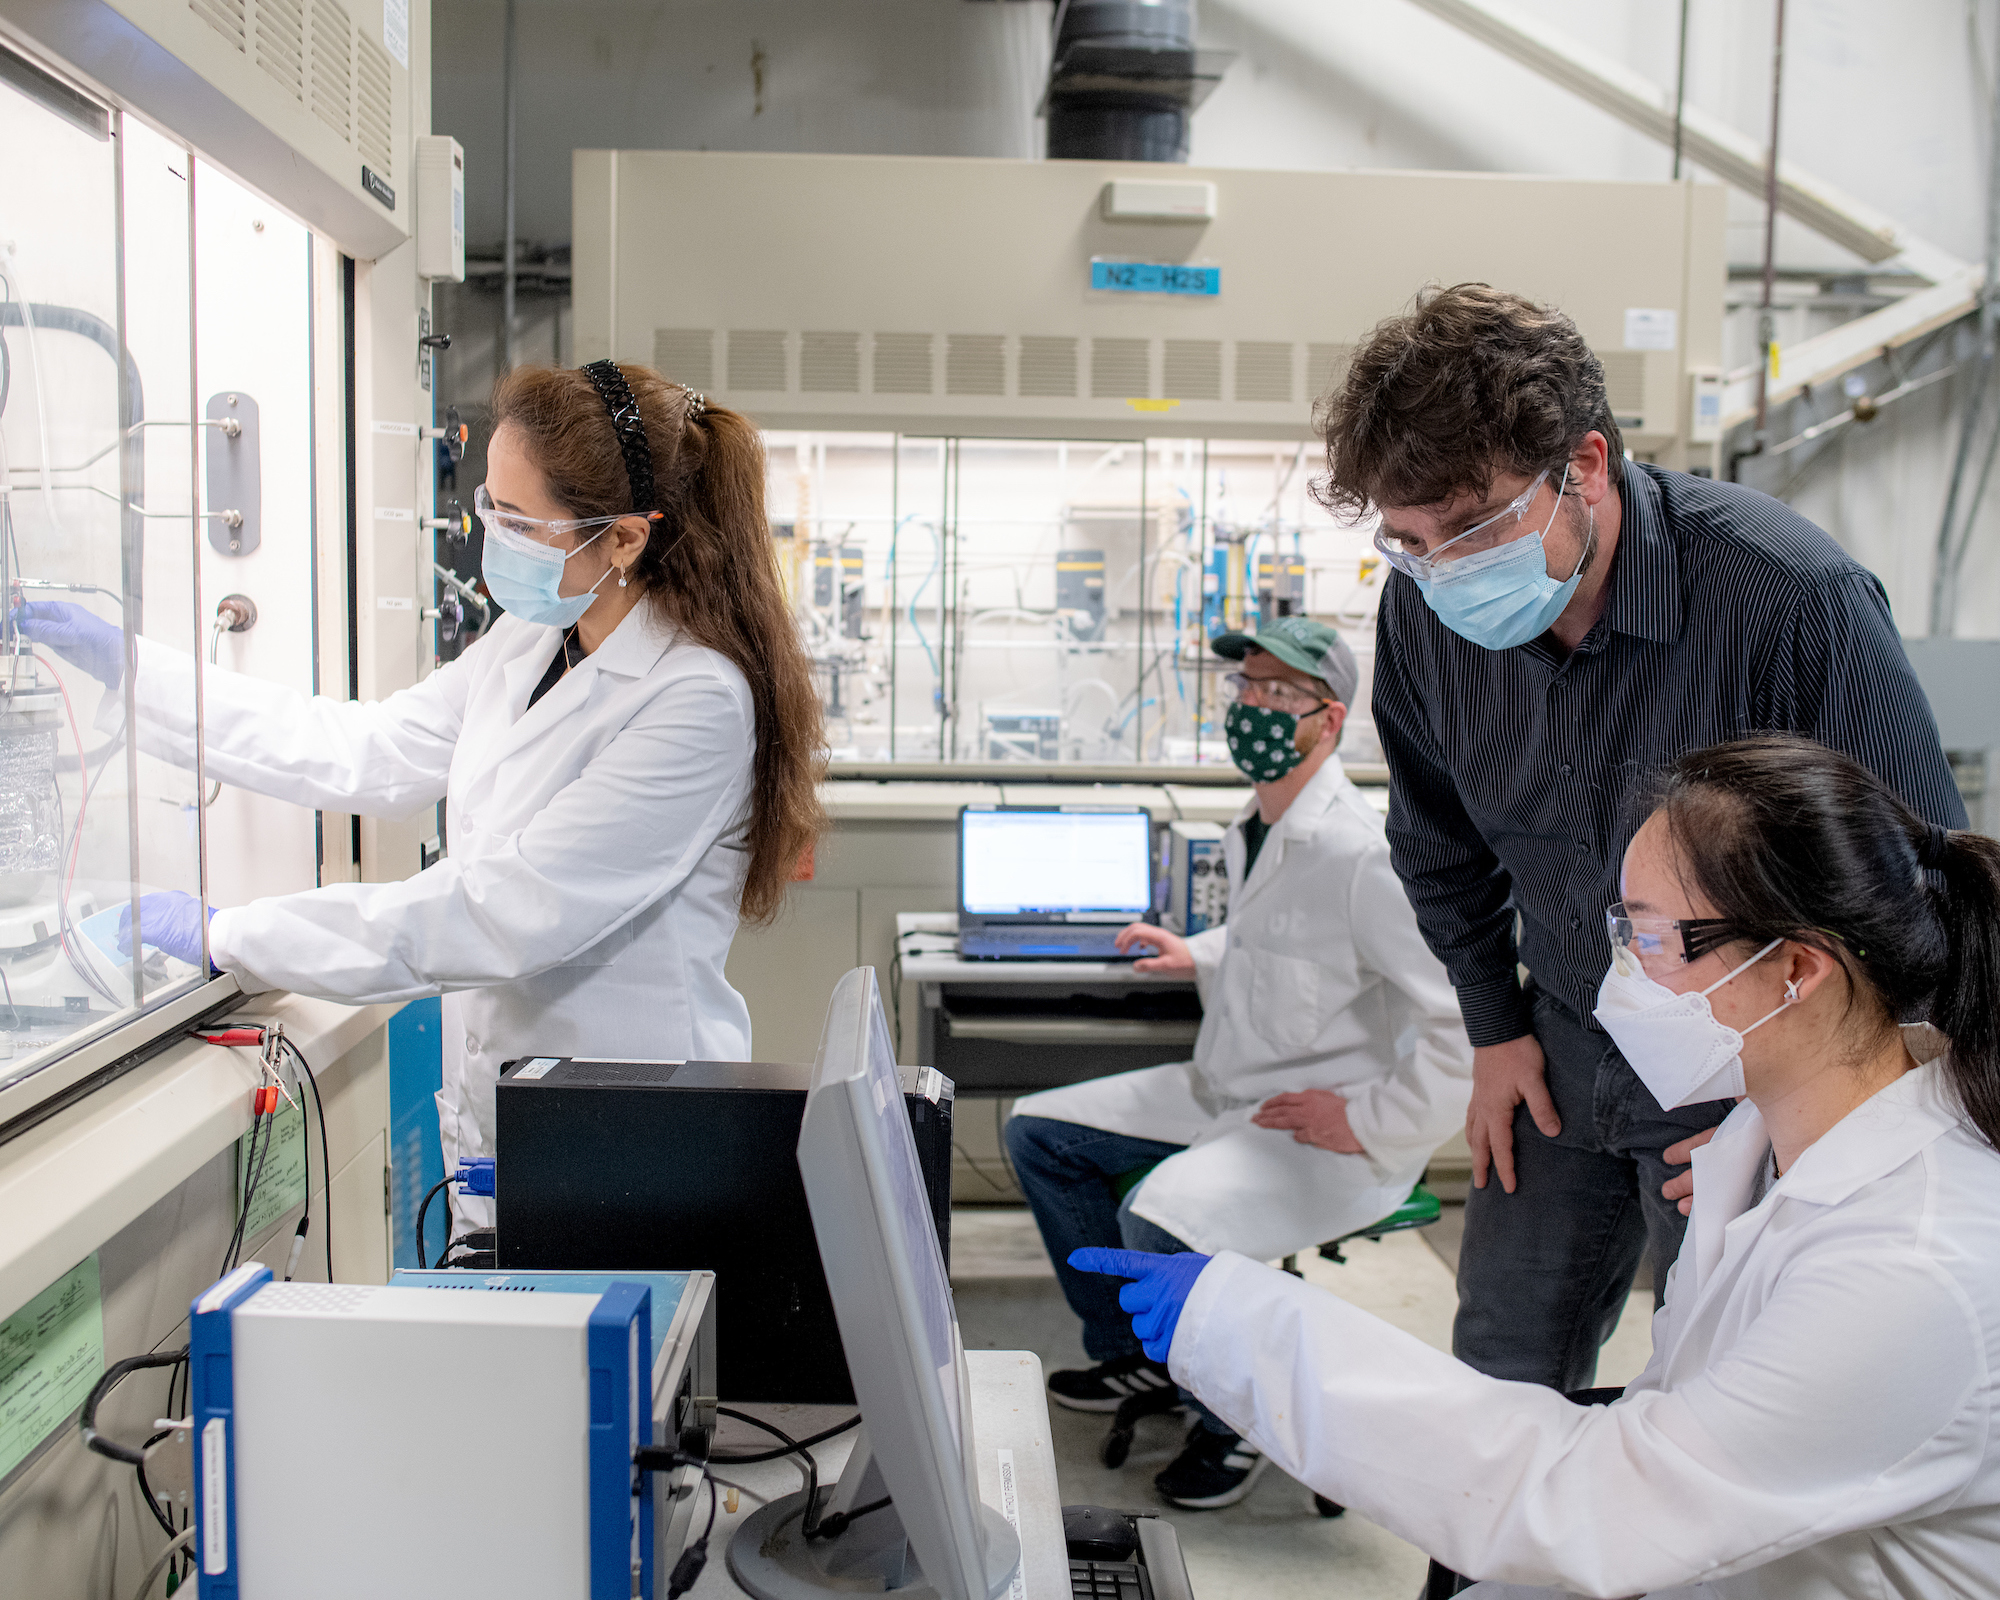 Marc Singer and three students wearing masks work in the lab facility